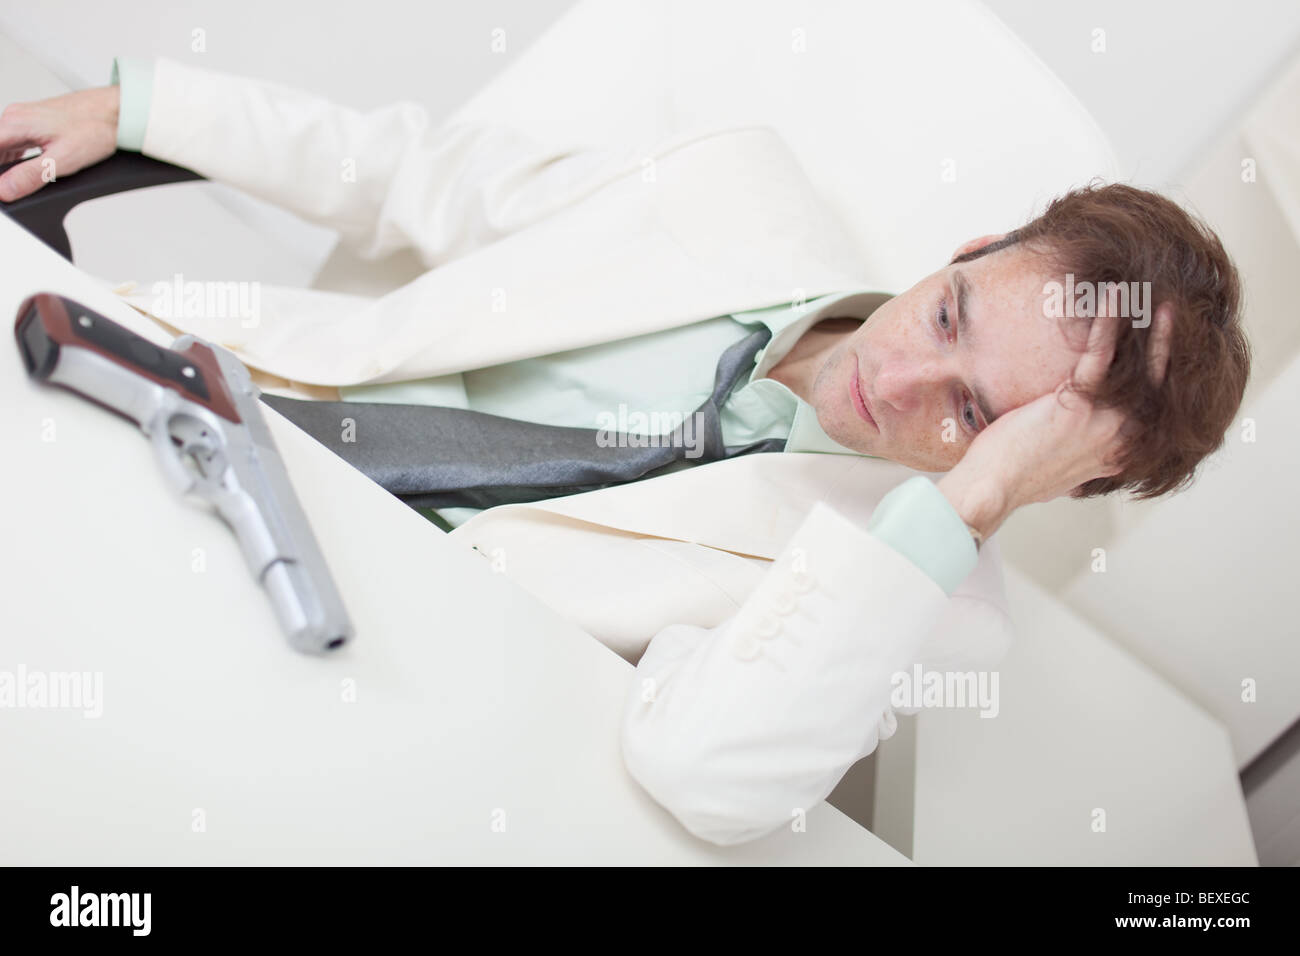 The young businessman reflects on suicide on a workplace Stock Photo